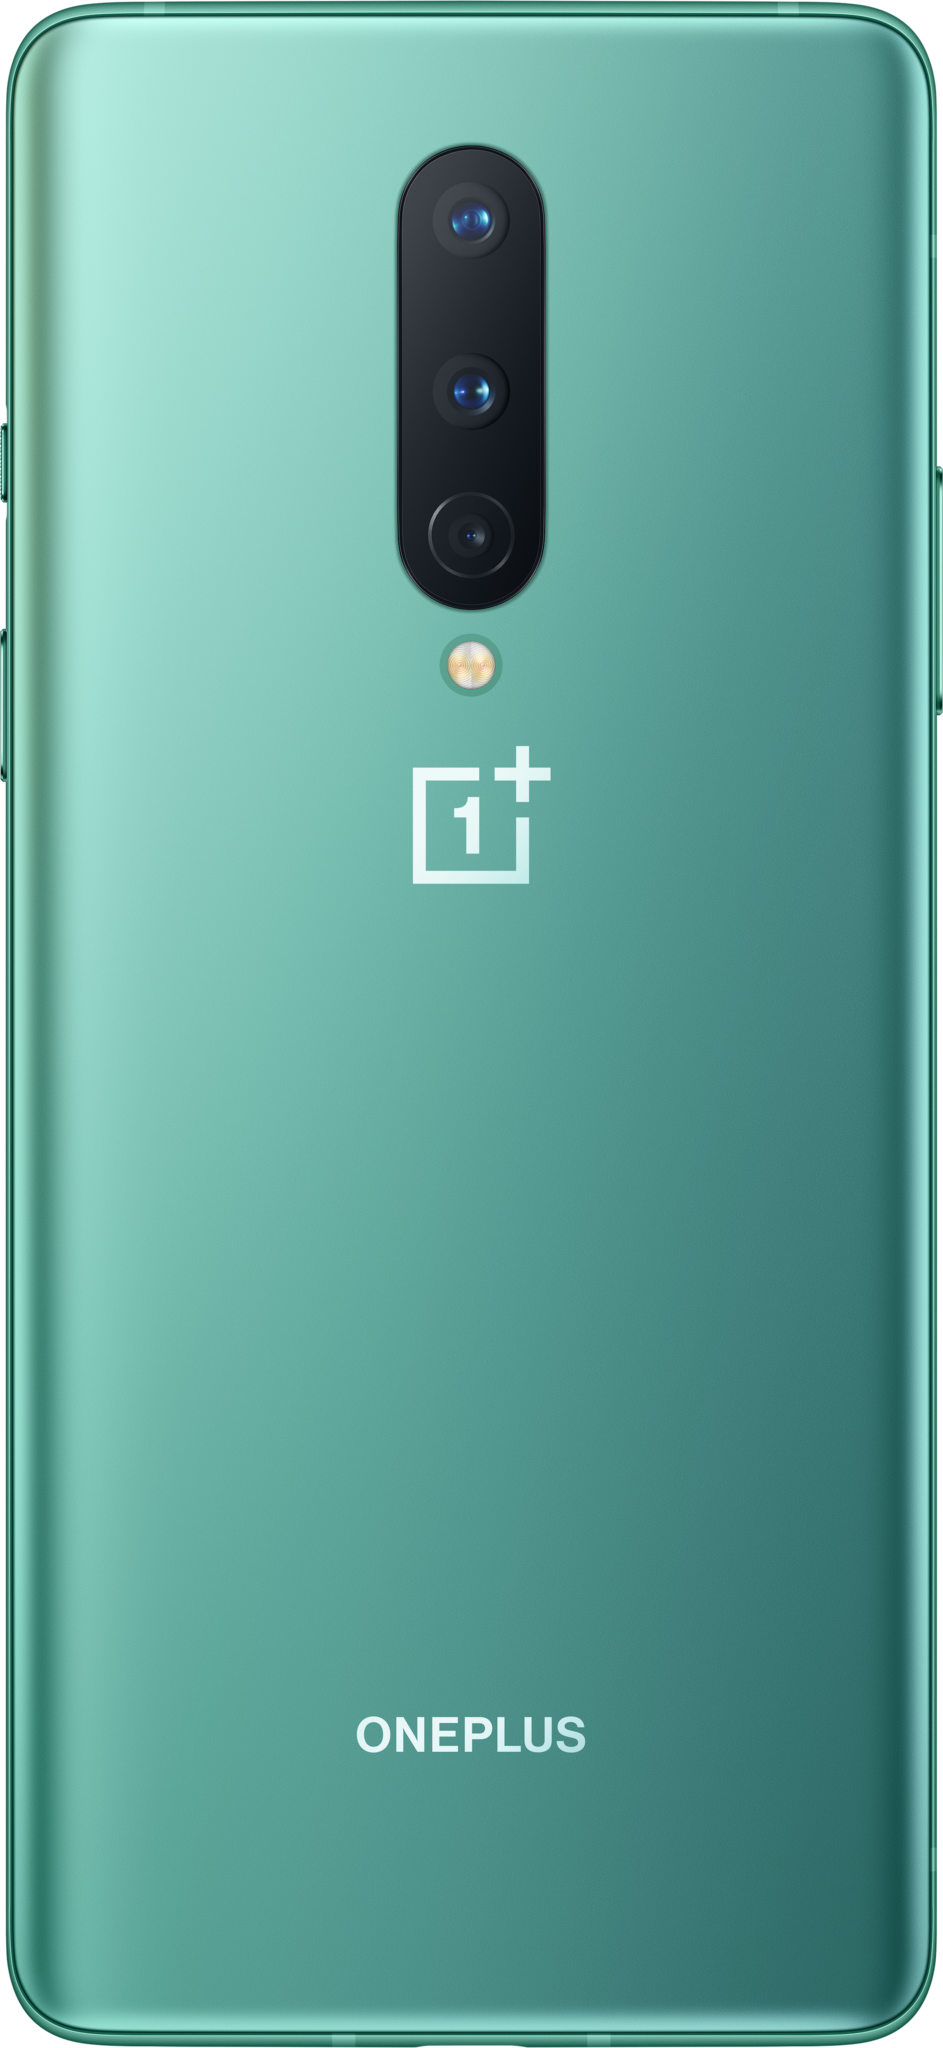 https://www.androidcentral.com/sites/androidcentral.com/files/styles/small/public/article_images/2020/04/oneplus-8-glacial-green-cropped.png?itok=AScOqwaI